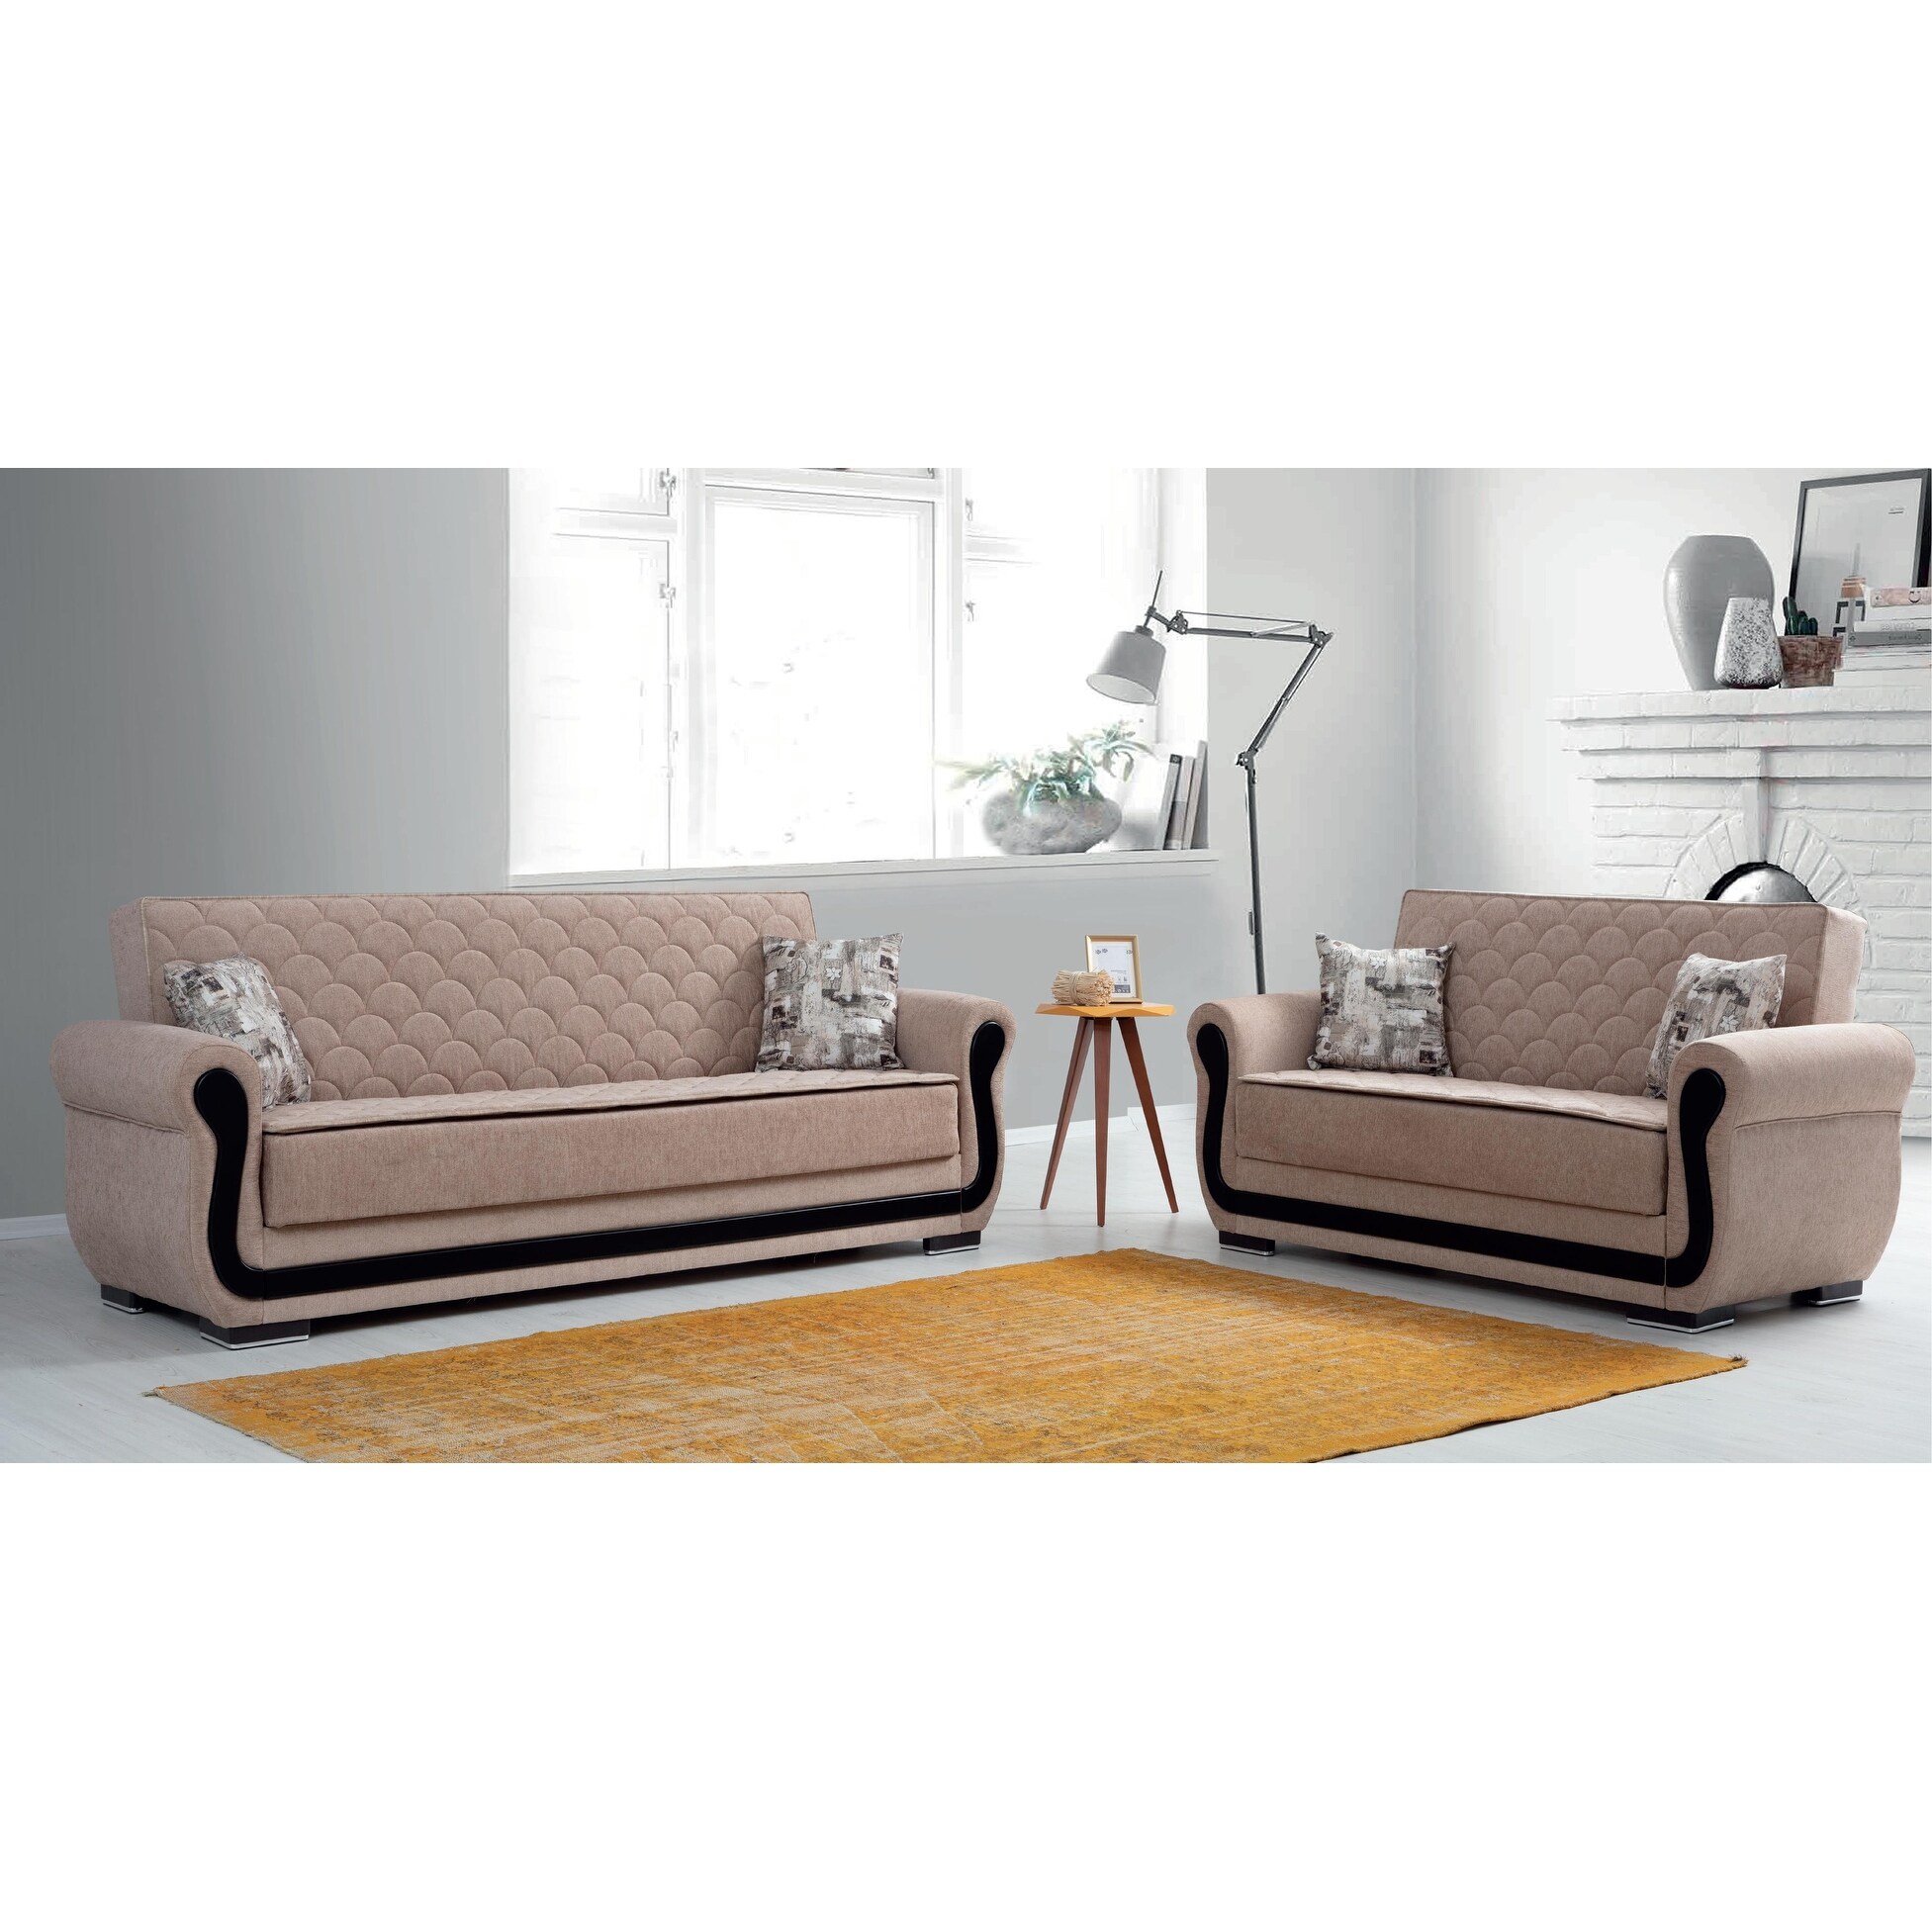 Avalon Beige Fabric Upholstered Convertible Sleeper Sofa with Storage